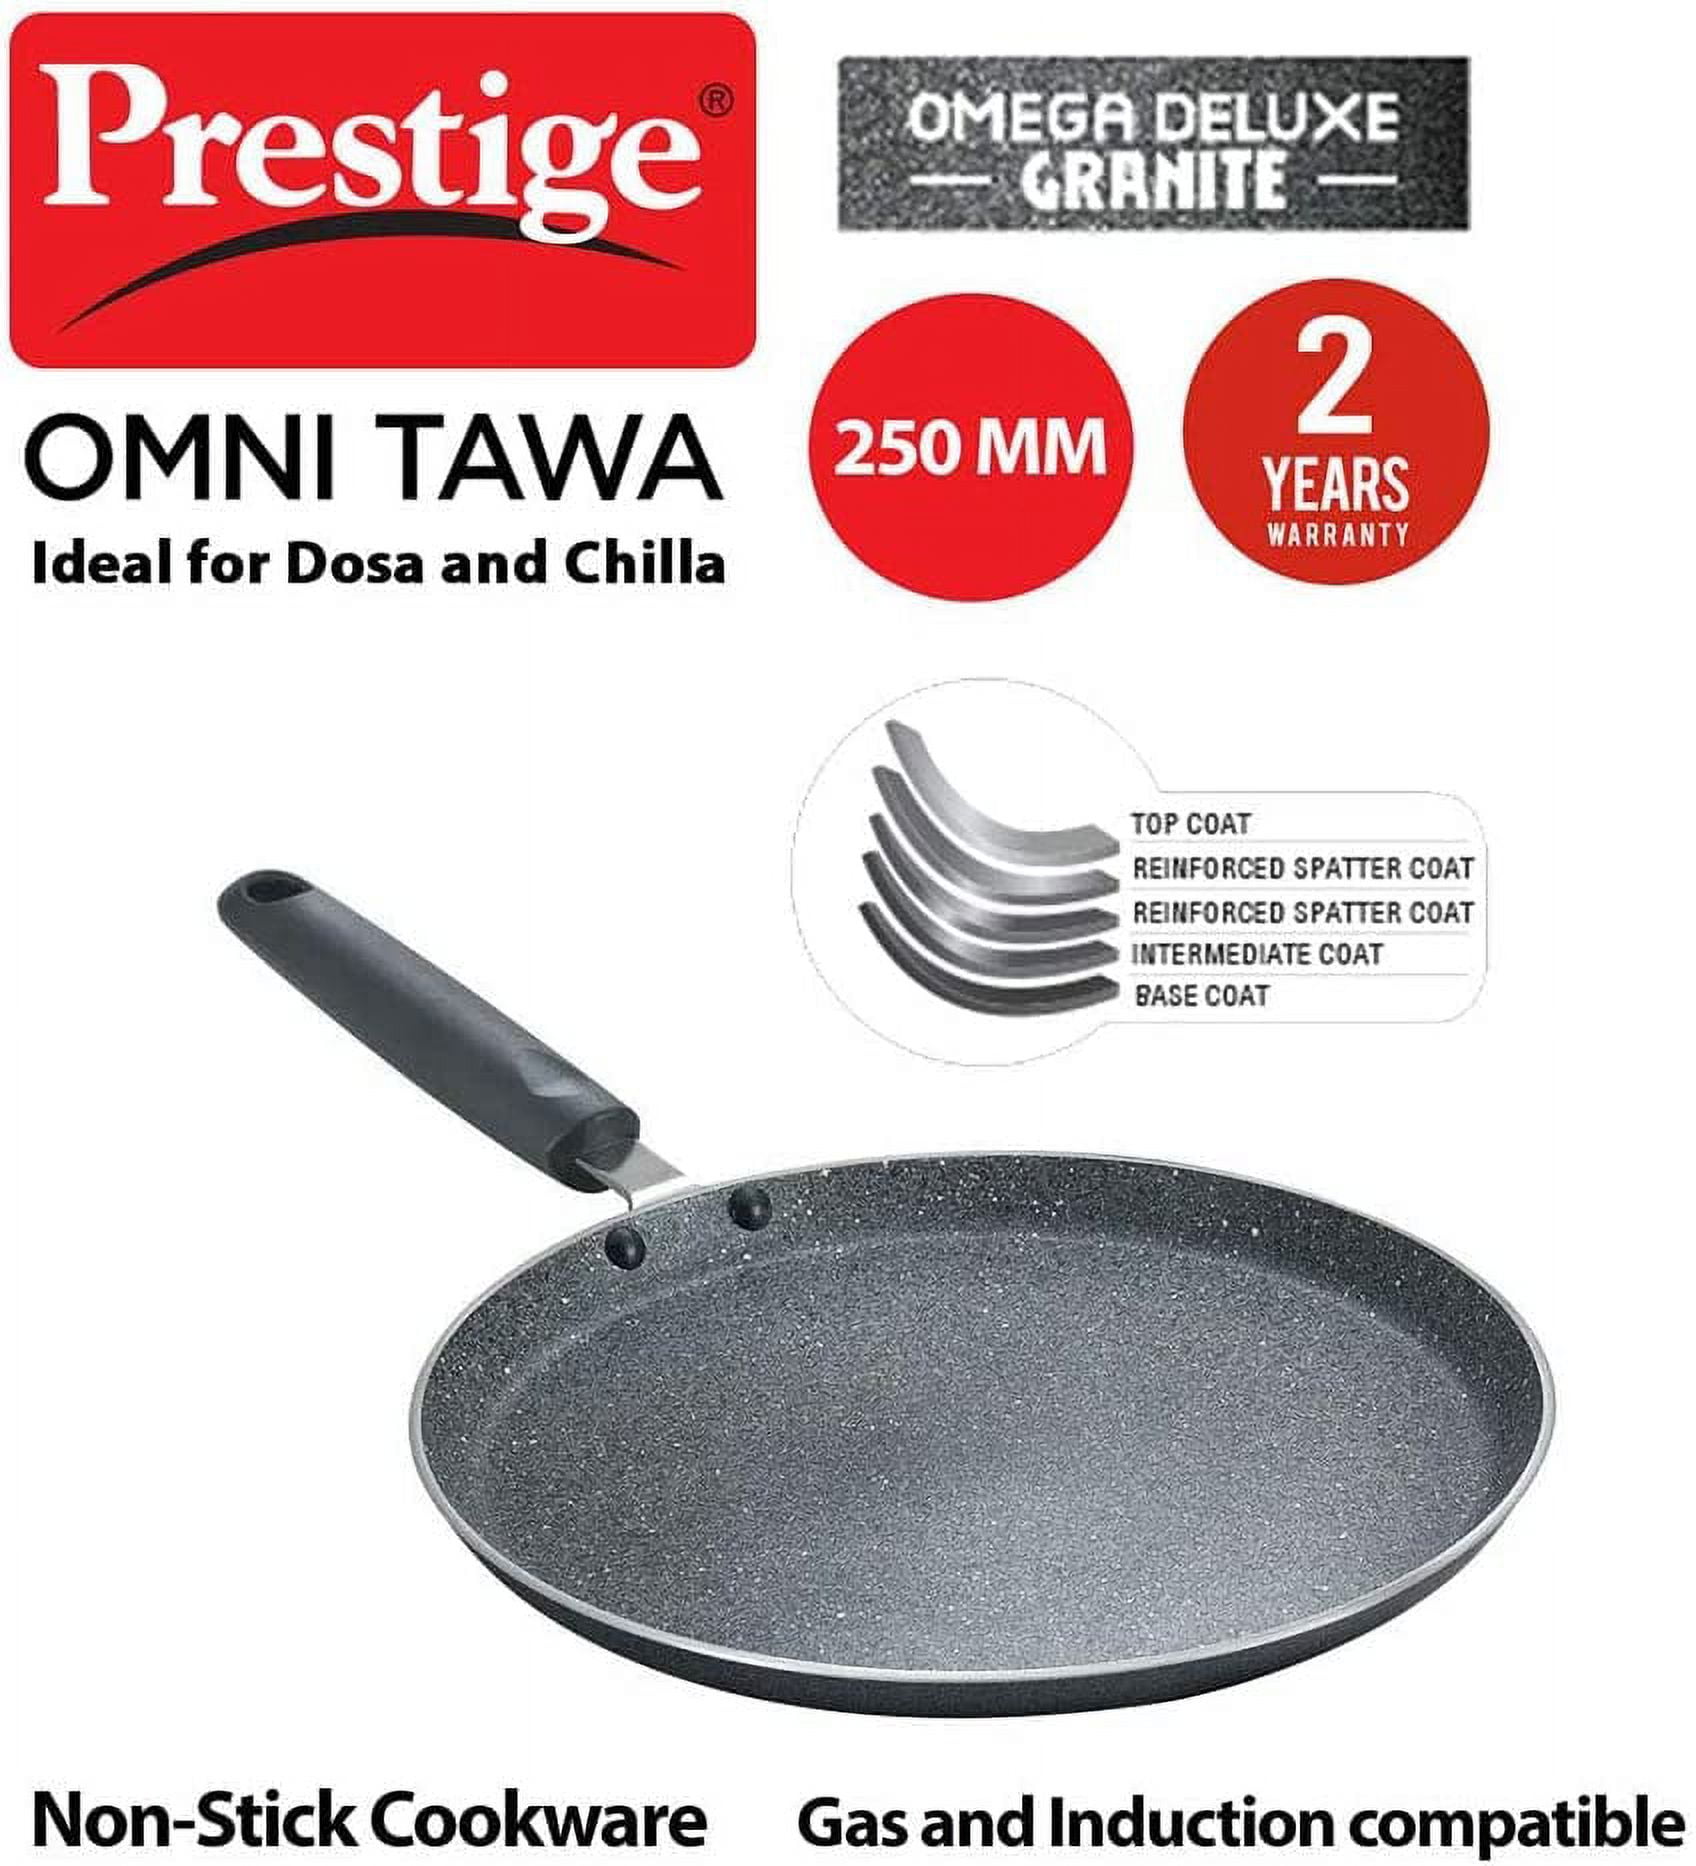 Prestige FLIP-ON TRI-PLY SS Pressure Cooker with Lid 18cm-3L, Silver and  Black, Innovative Lock Lid with Omega Deluxe Granite Combo Set  Cookware-Tawa & Fry Pan